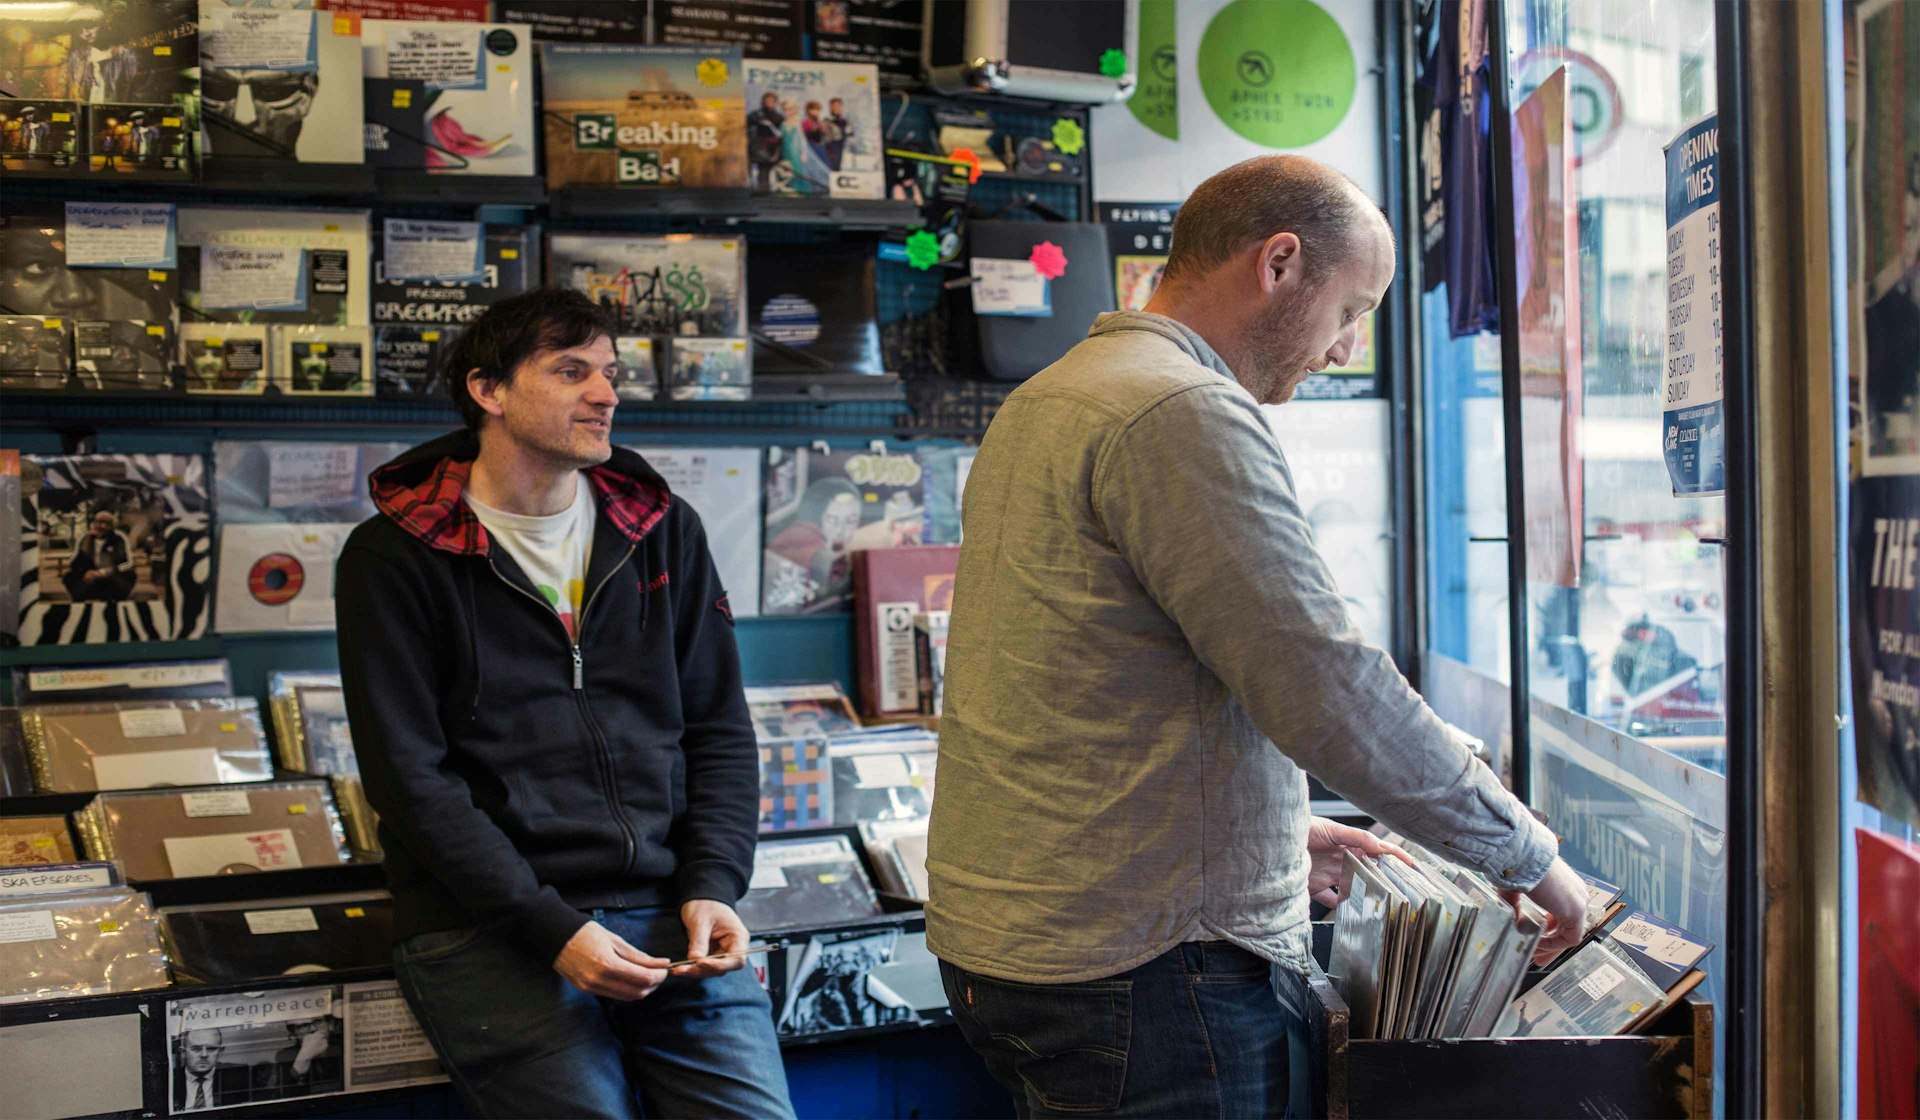 Banquet Records on how to keep your music store alive